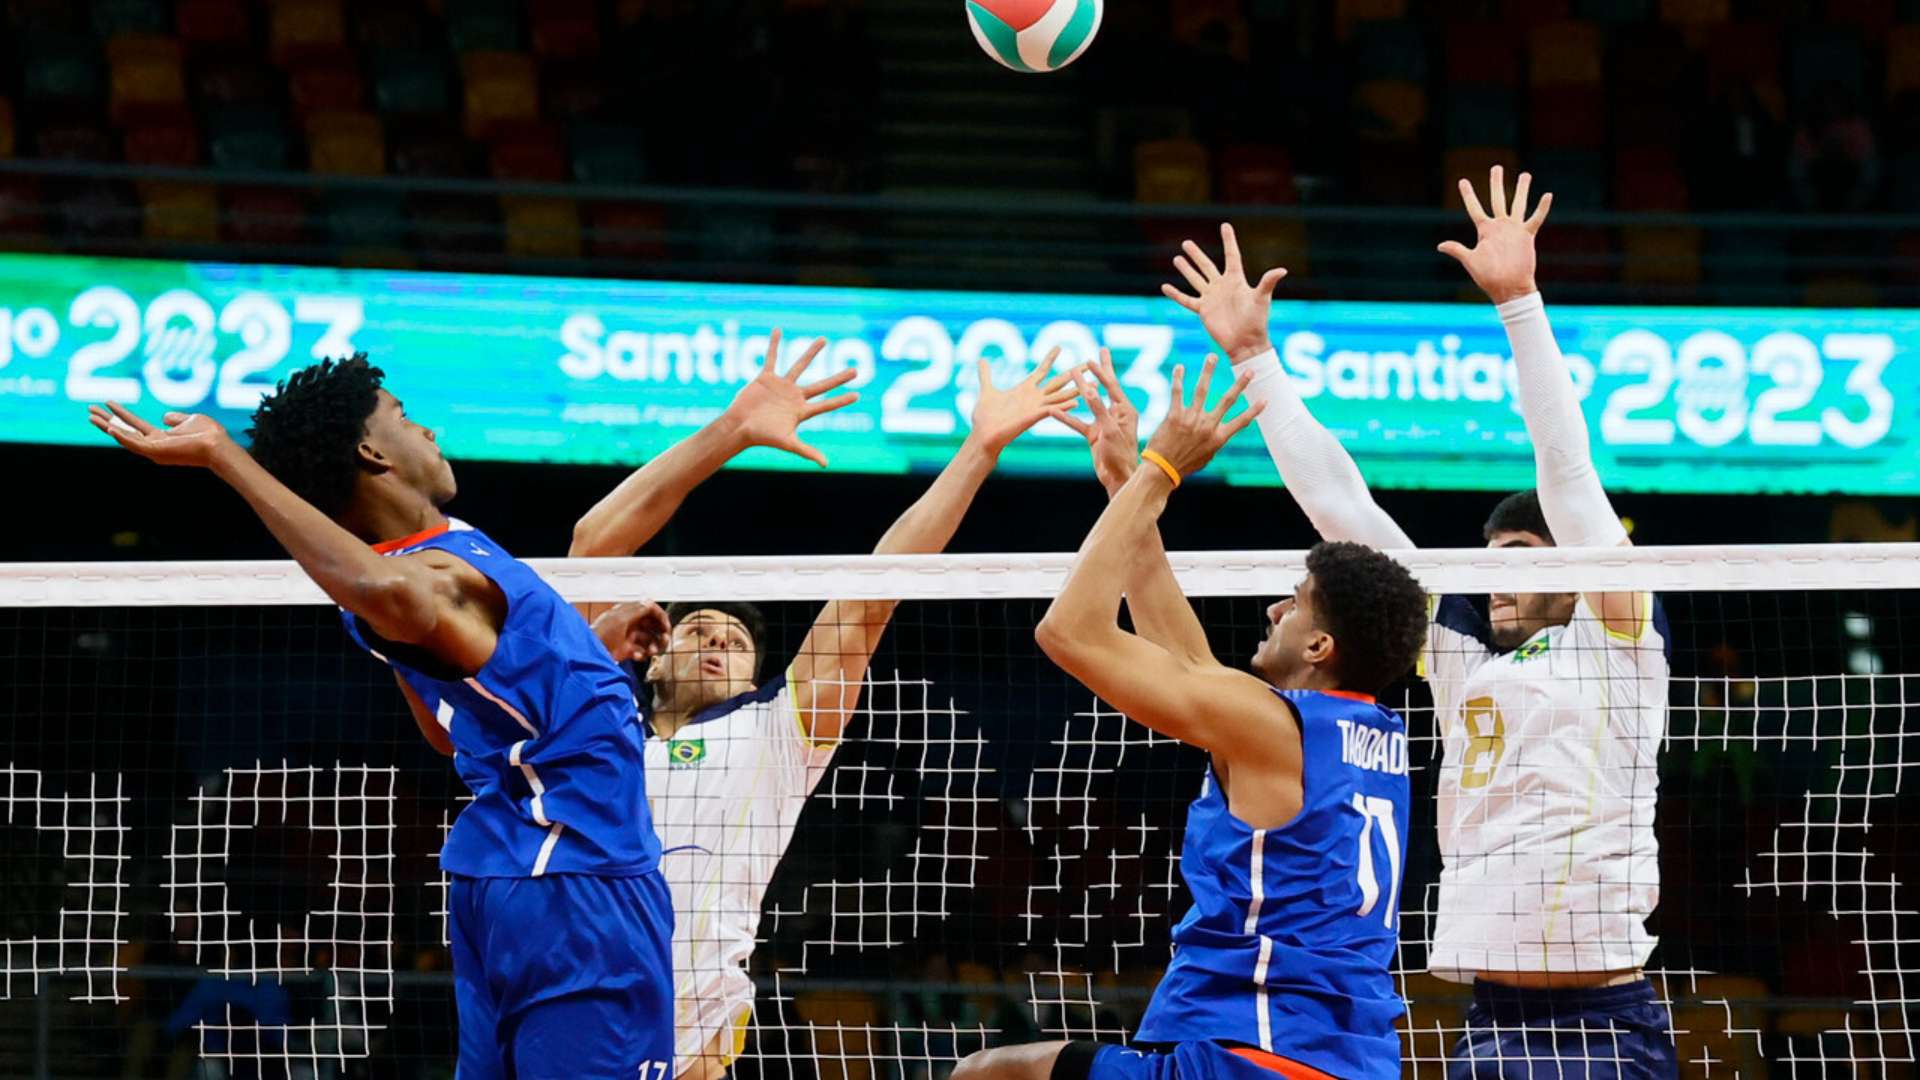 Brazil Saves a Match Point to Advance to Male's Volleyball Semifinals